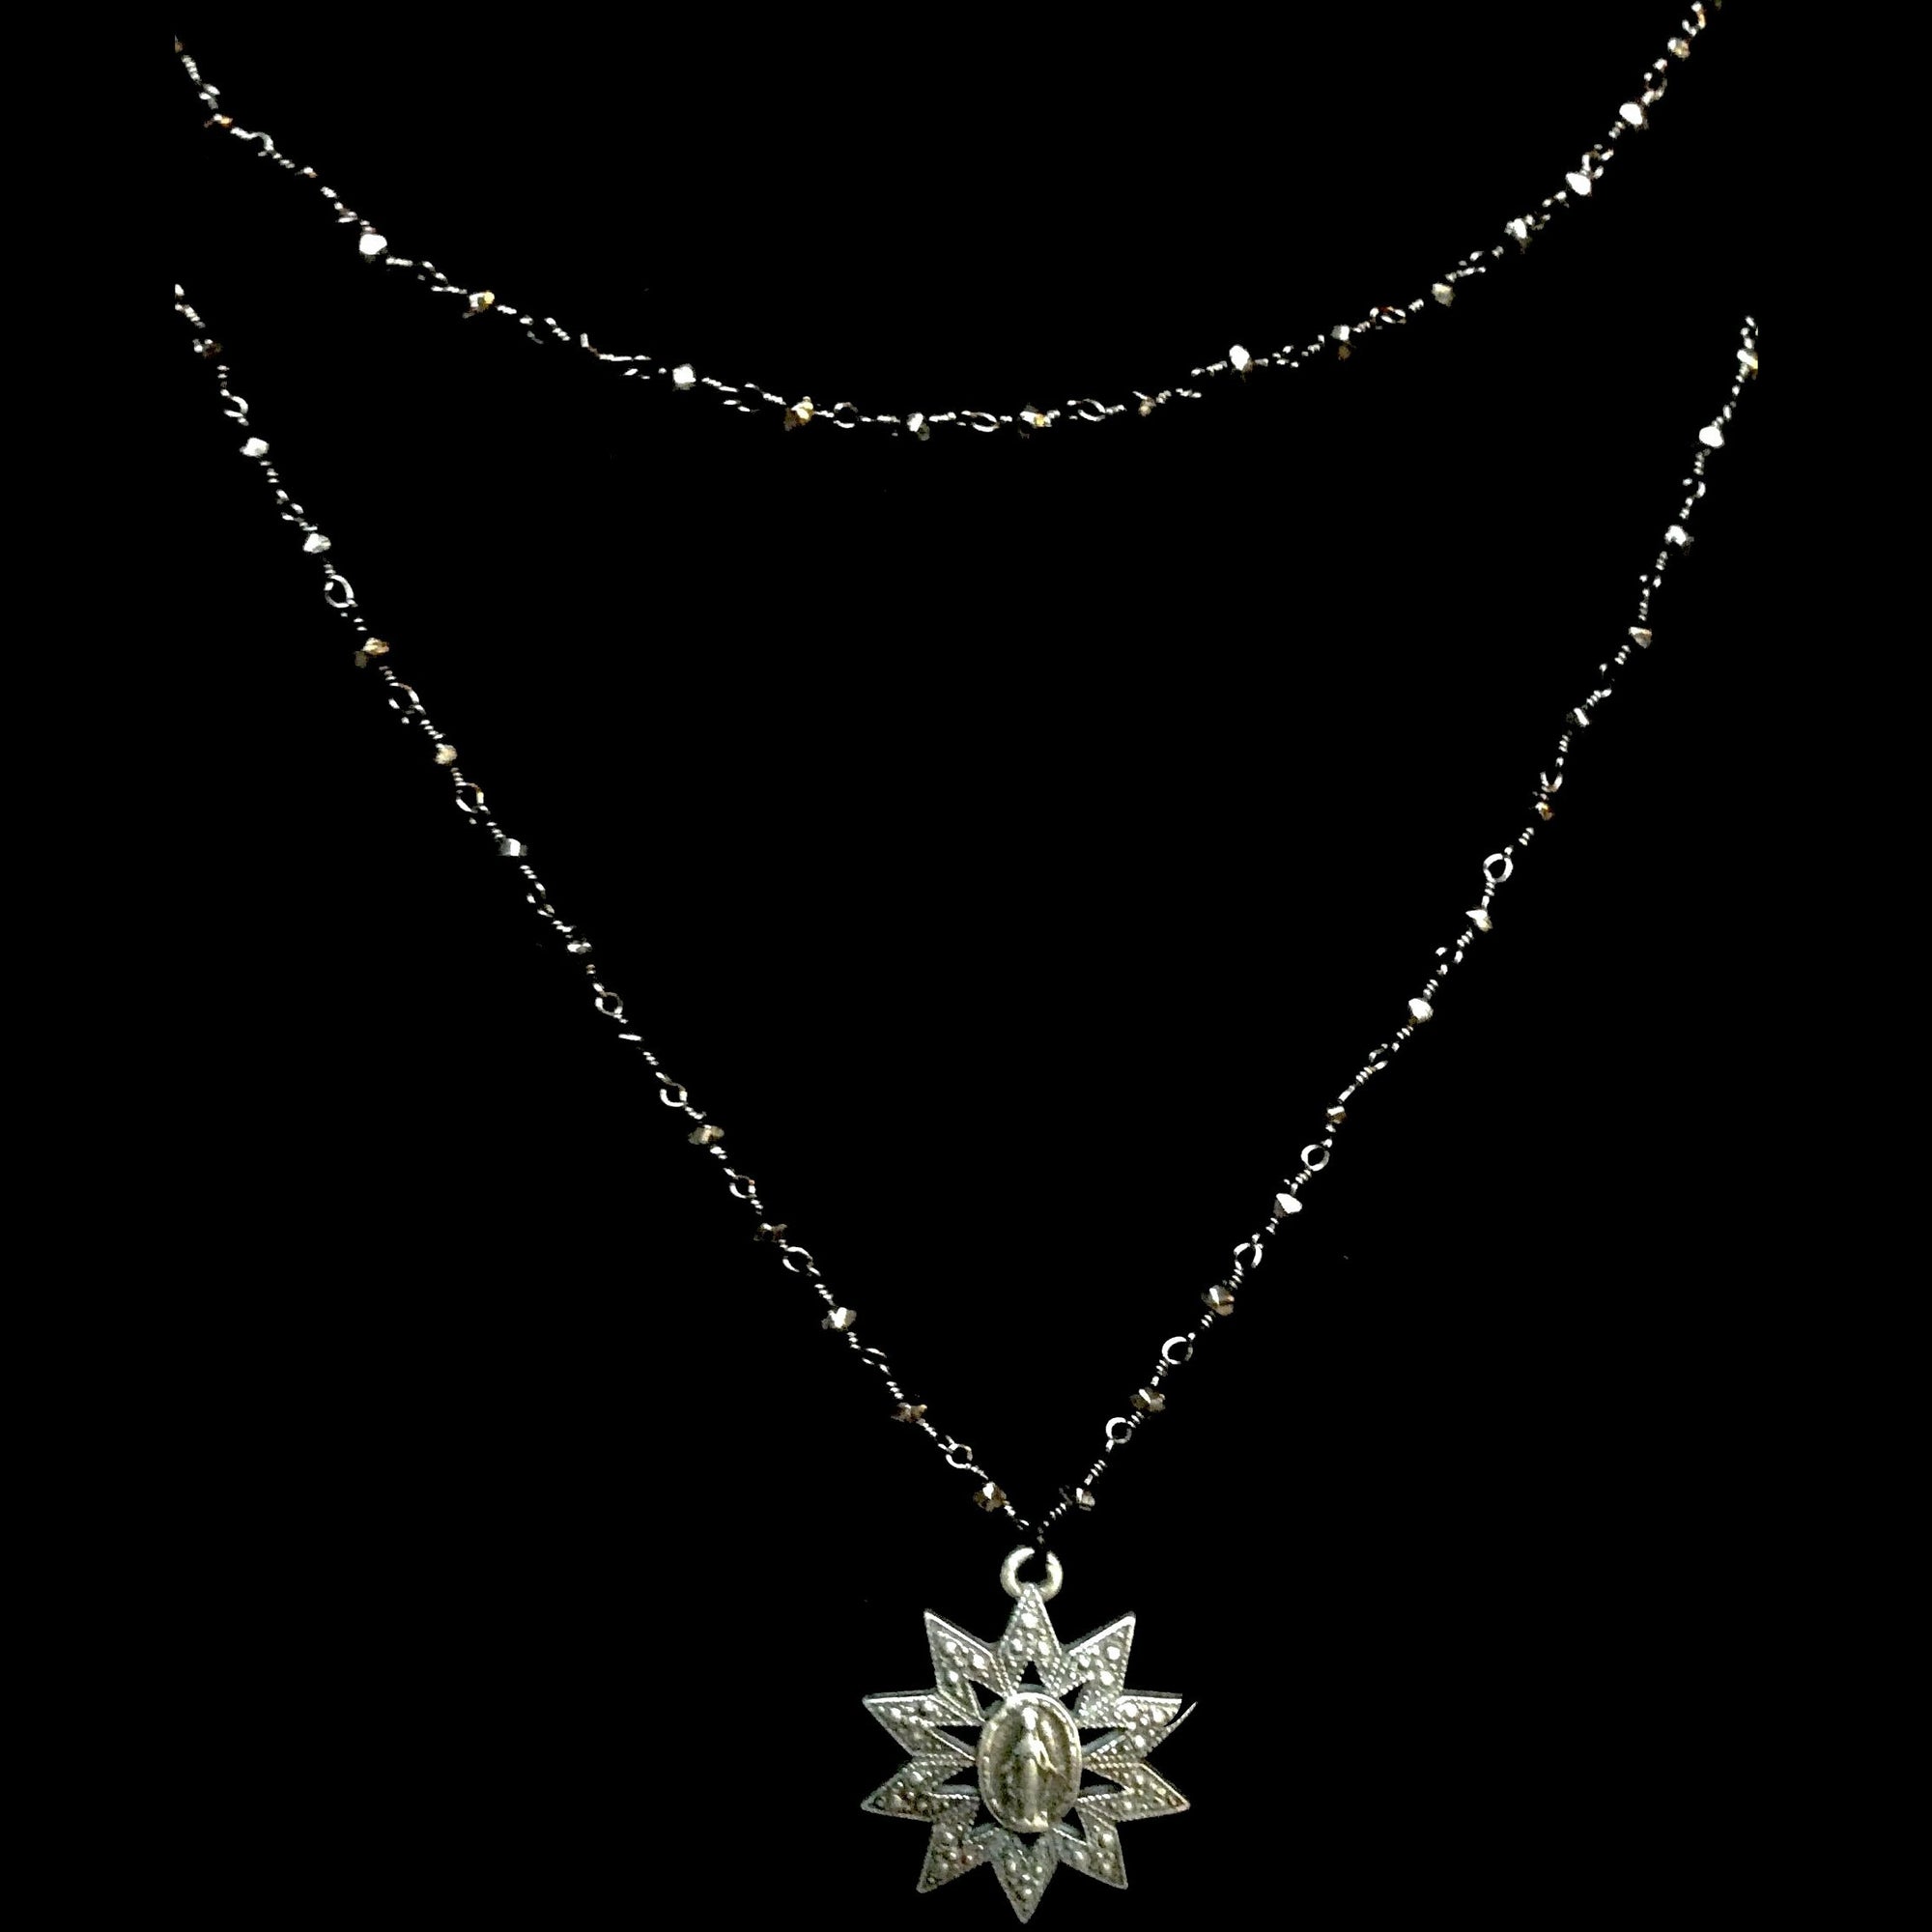 Forgotten Graces "Miraculous Rays" Double Strand Black Spinel Necklace